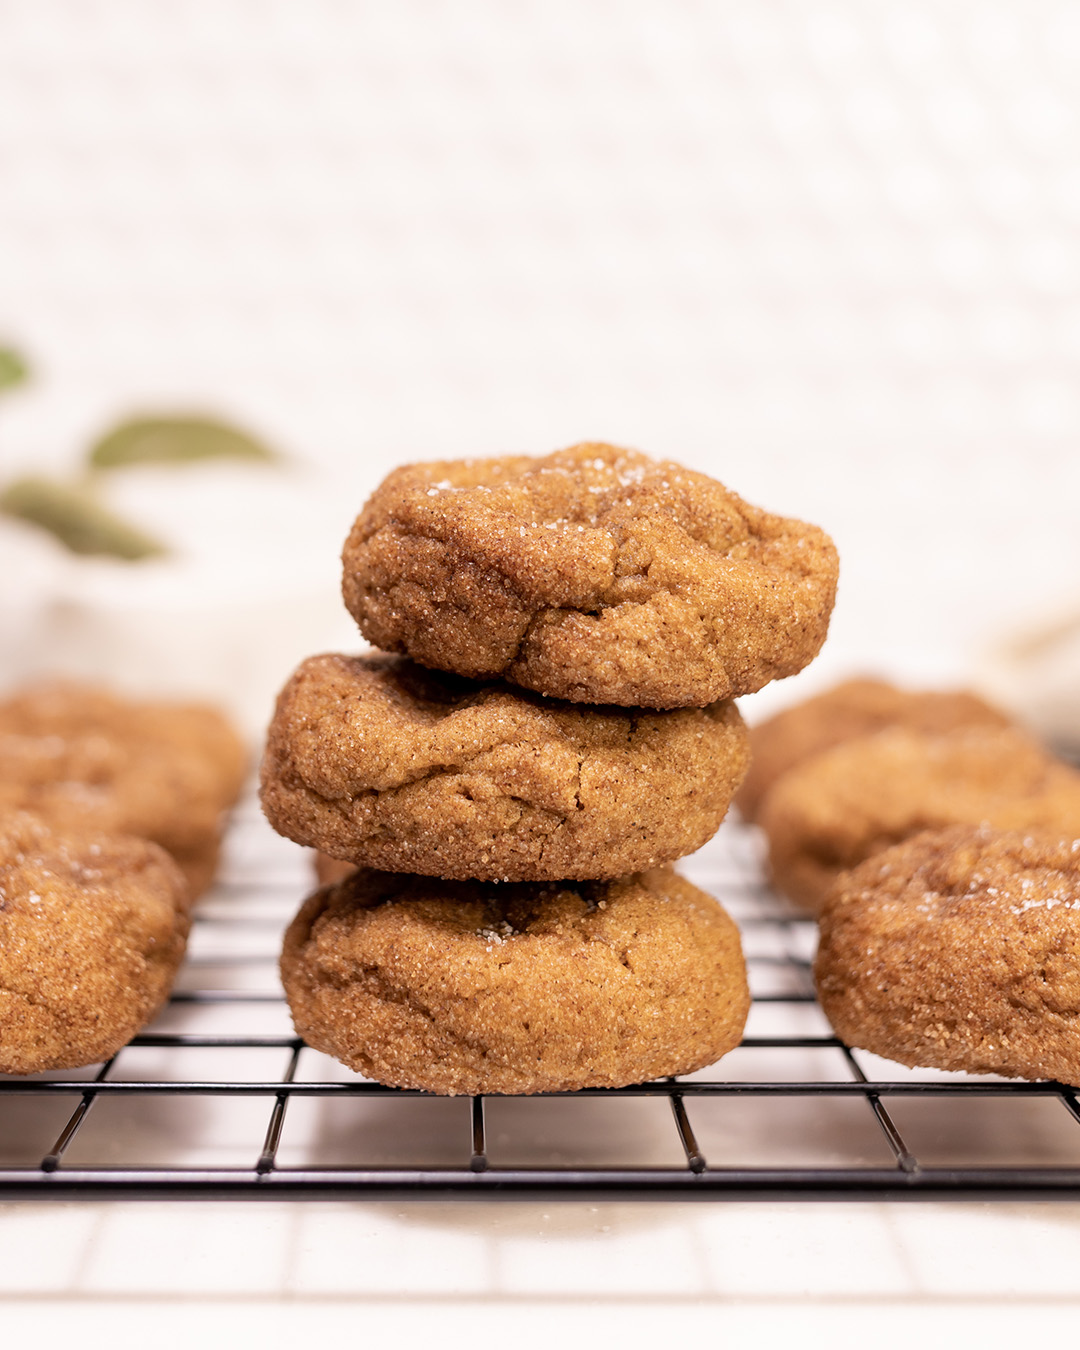 These pumpkin snickerdoodles have that classic, chewy snickerdoodle texture with the flavor of everyone's favorite fall dessert, pumpkin pie!